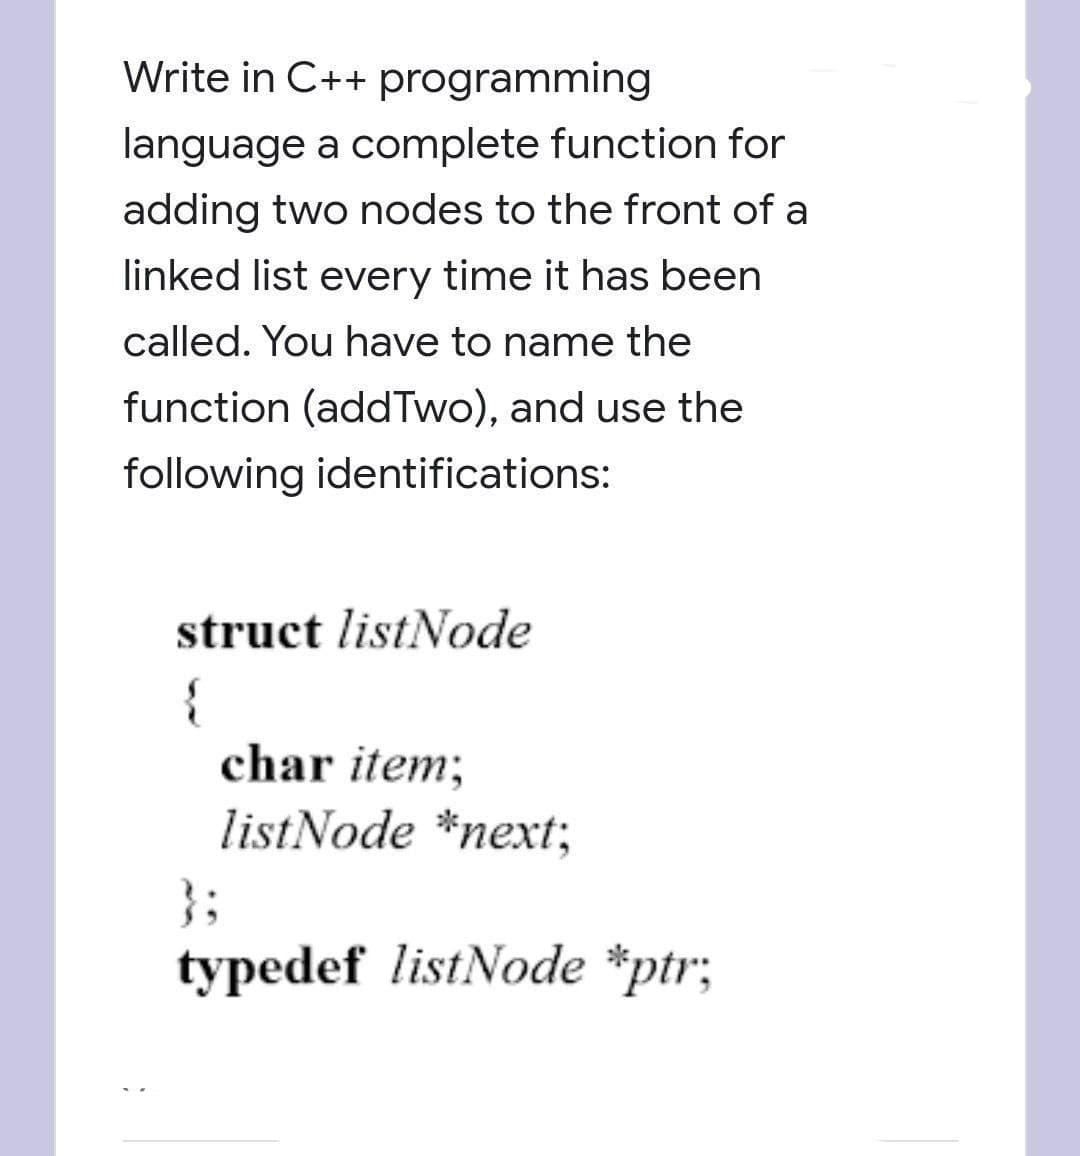 Write in C++ programming
language a complete function for
adding two nodes to the front of a
linked list every time it has been
called. You have to name the
function (addTwo), and use the
following identifications:
struct listNode
{
char item;
listNode *next;
}3;
typedef listNode *ptr;
